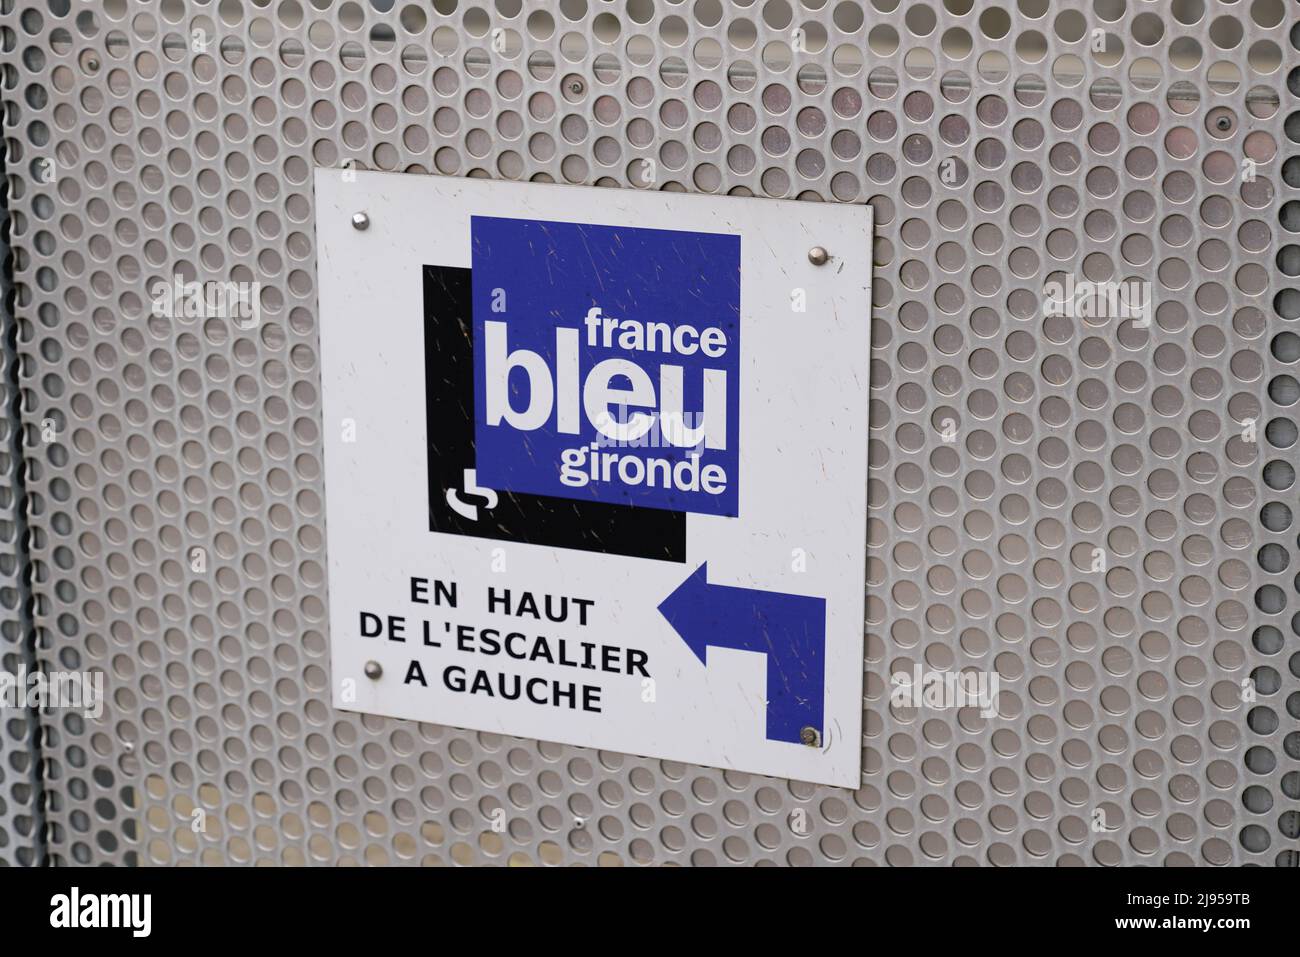 Bordeaux , Aquitaine France - 05 04 2022 : france bleu gironde text logo  locale radio sign brand network French public service radio broadcaster  Stock Photo - Alamy